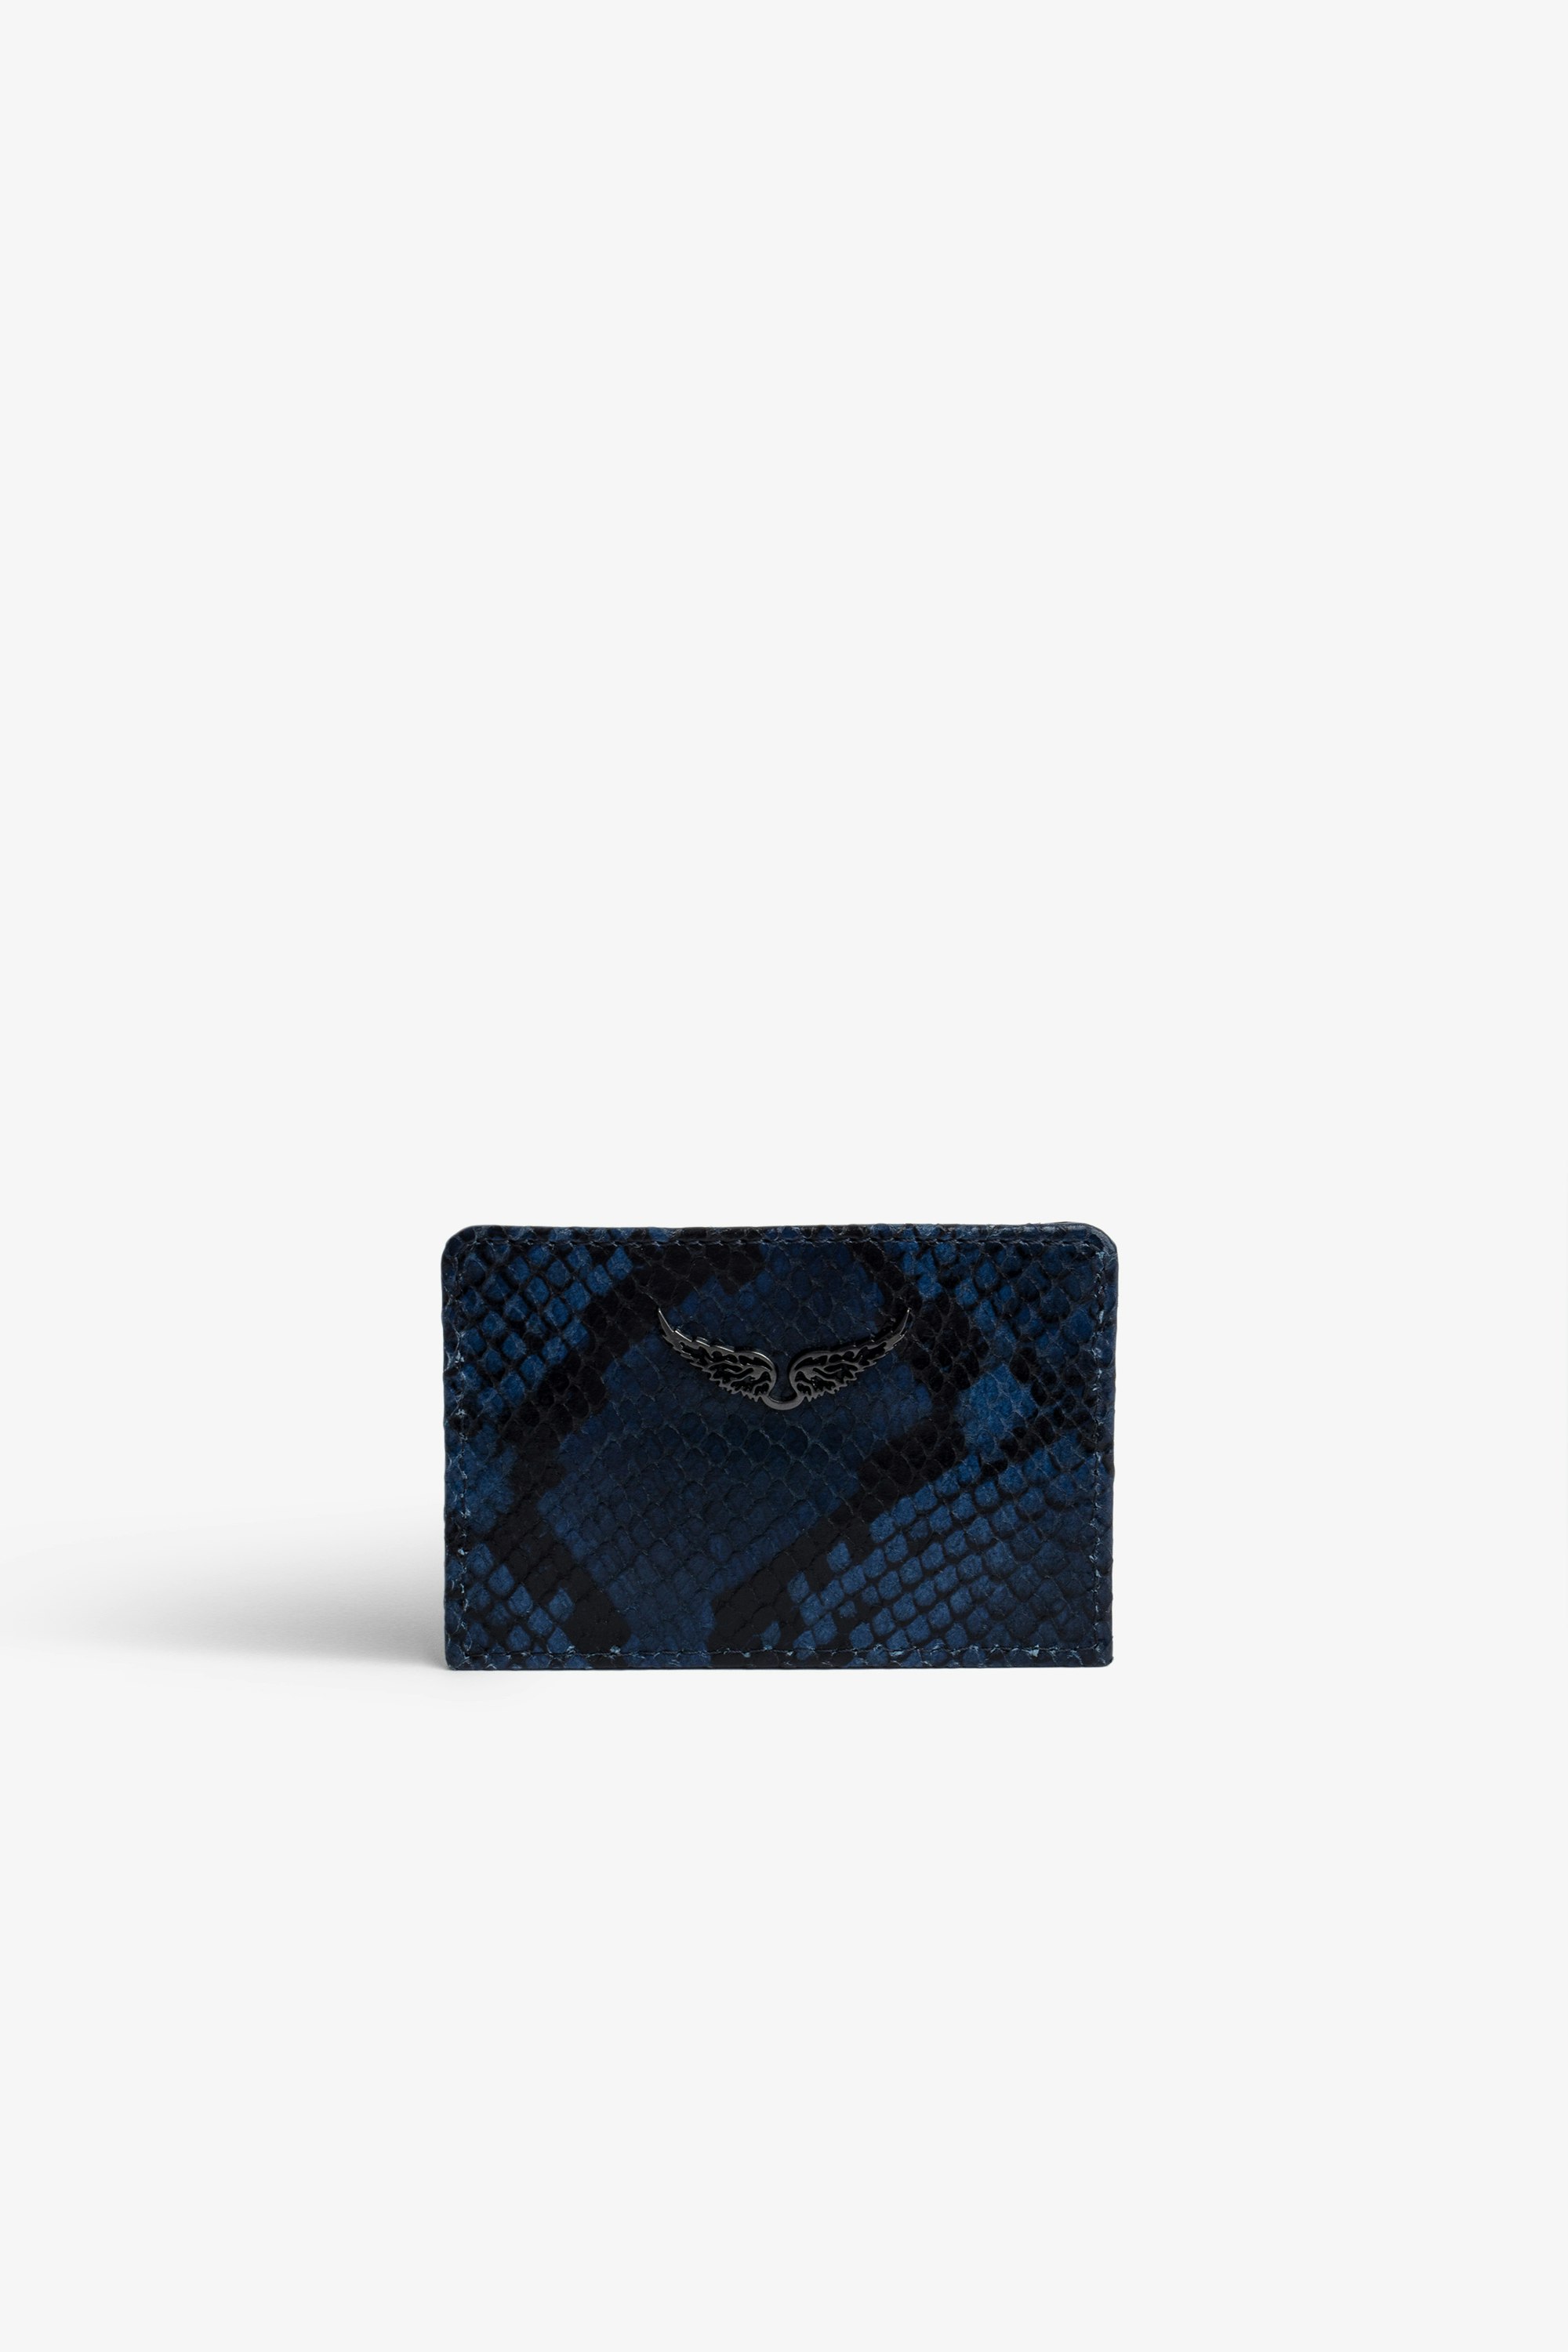 ZV Pass Card Case Women’s card holder in black and blue python-effect leather